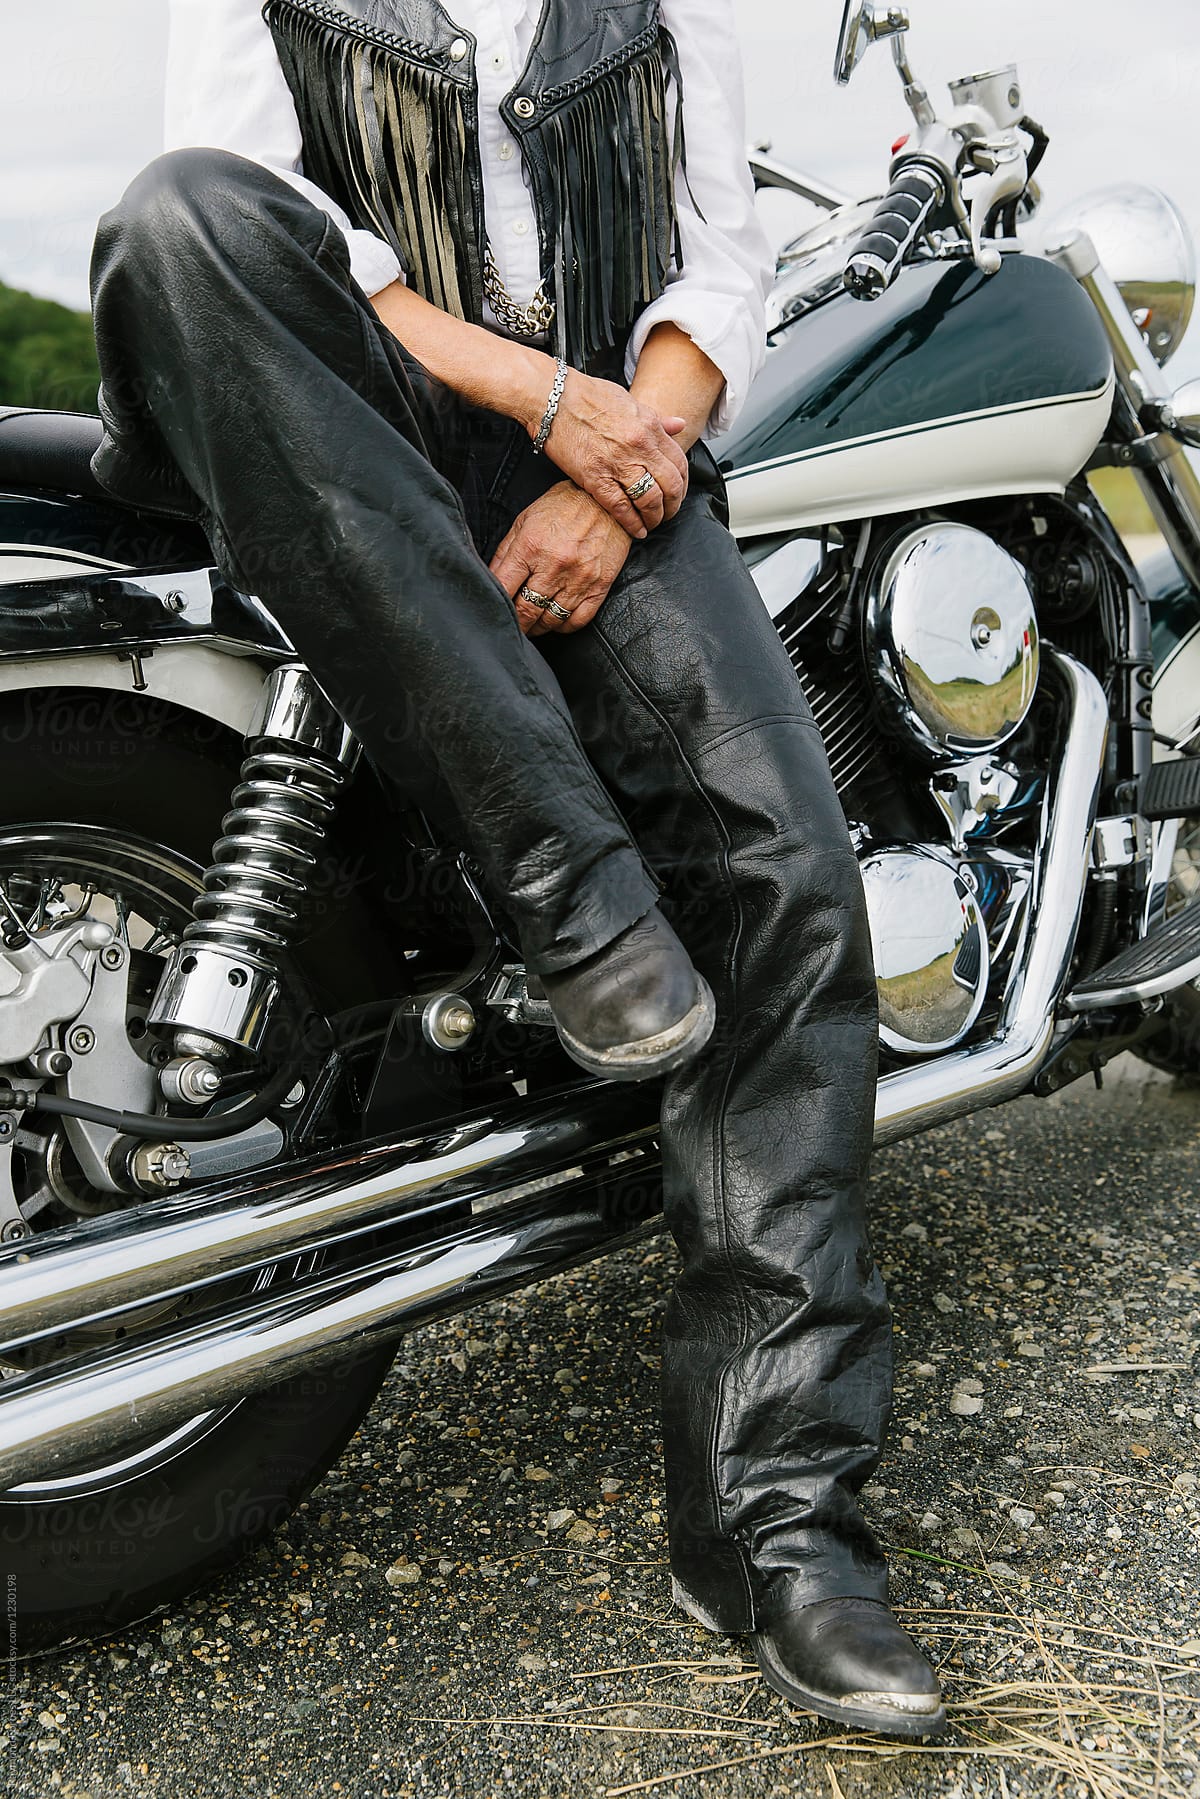 Leather suit on Motorcycle Rider